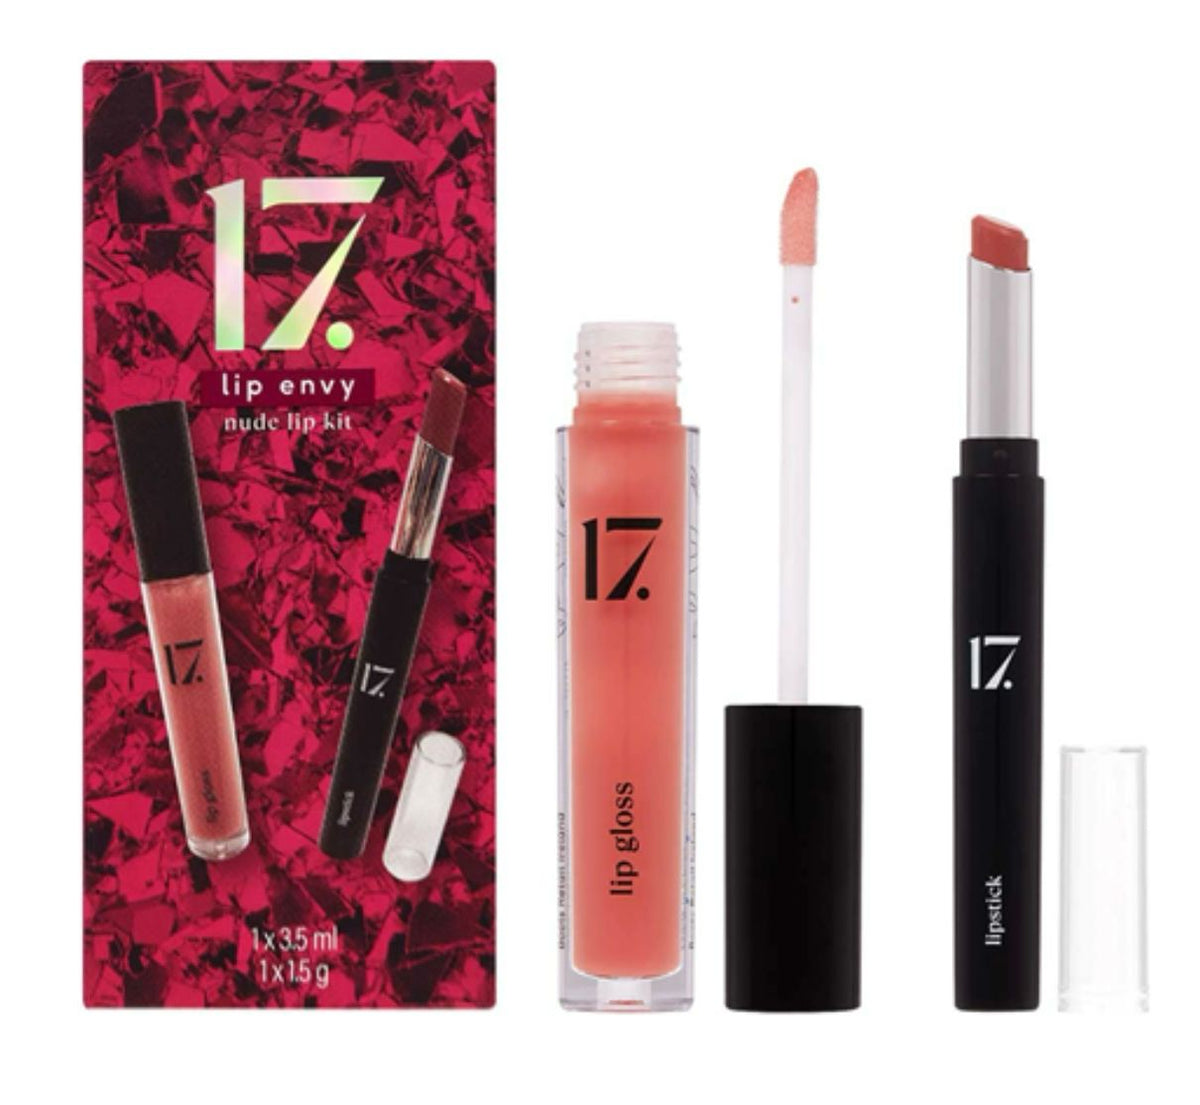 17. Lip Envy - Nude Lip Kit  For the perfect nude lip